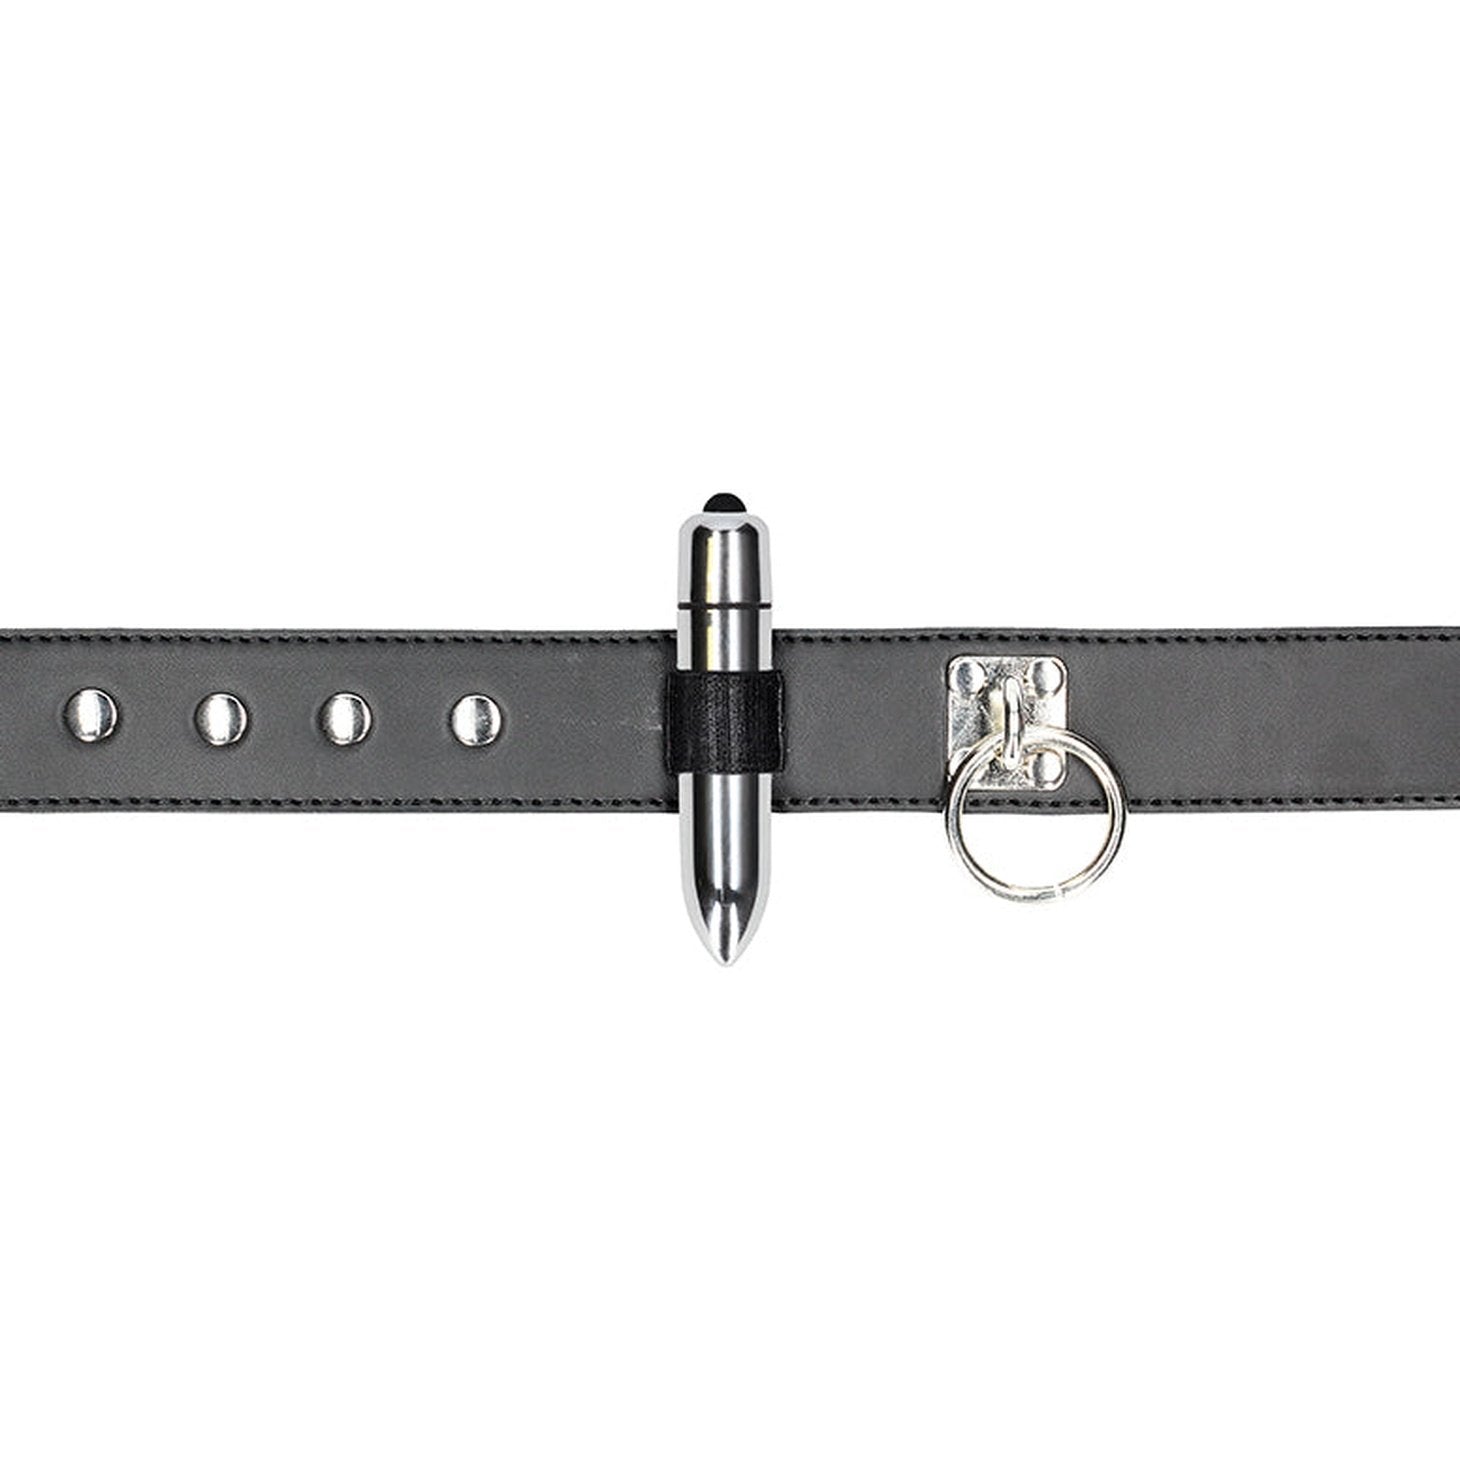 Adjustable Cuff Belt - Black Ouch!